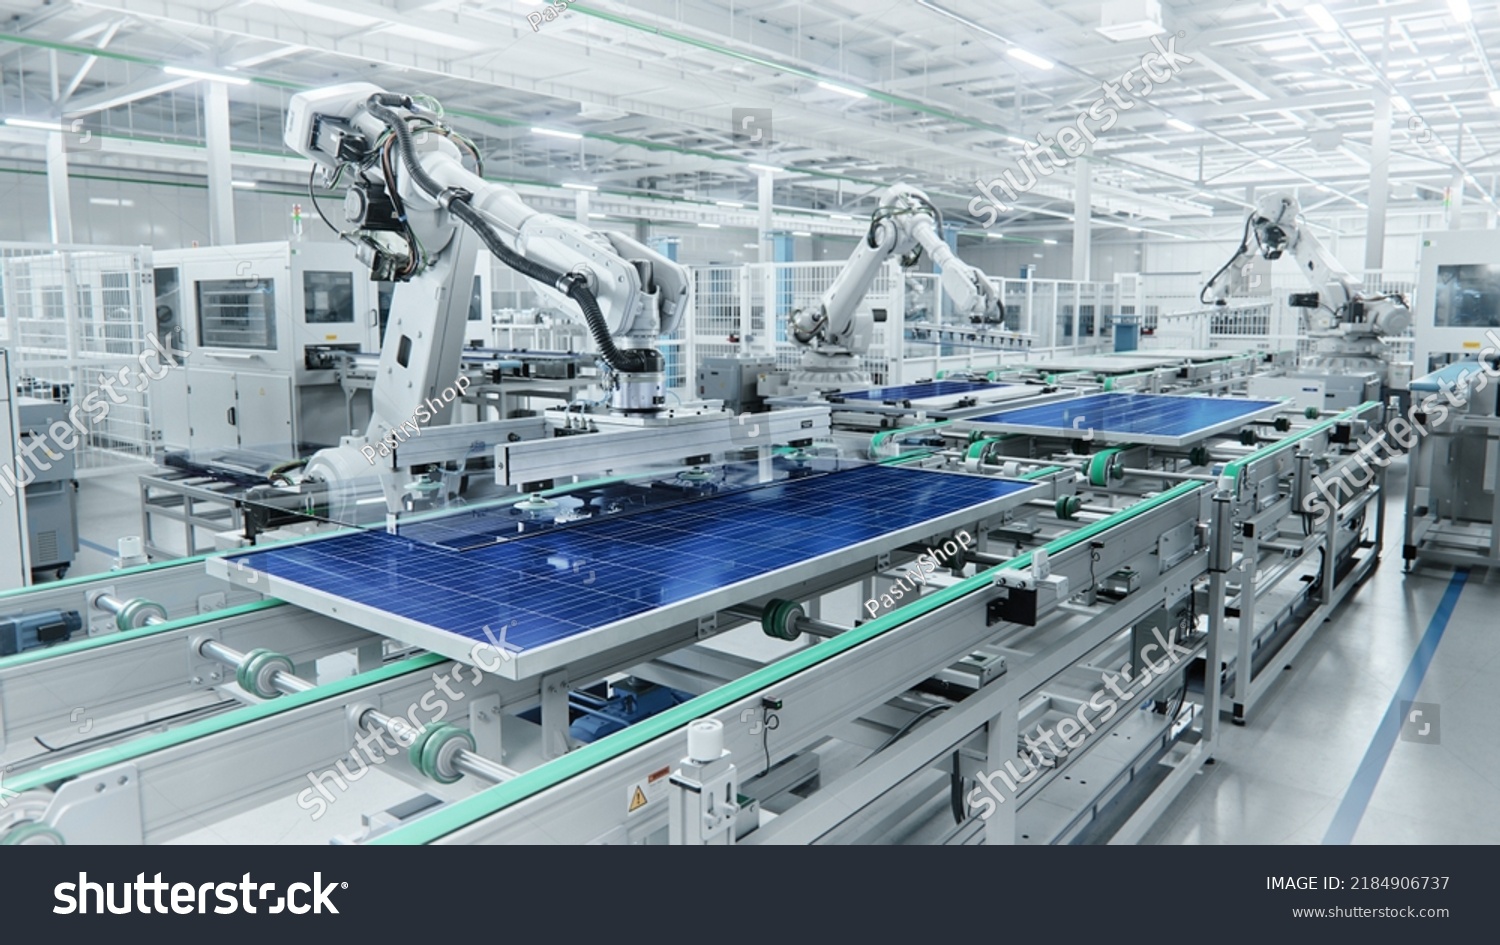 Wide Shot of Solar Panel Production Line with Robot Arms at Modern Bright Factory. Solar Panels are being Assembled on Conveyor. #2184906737